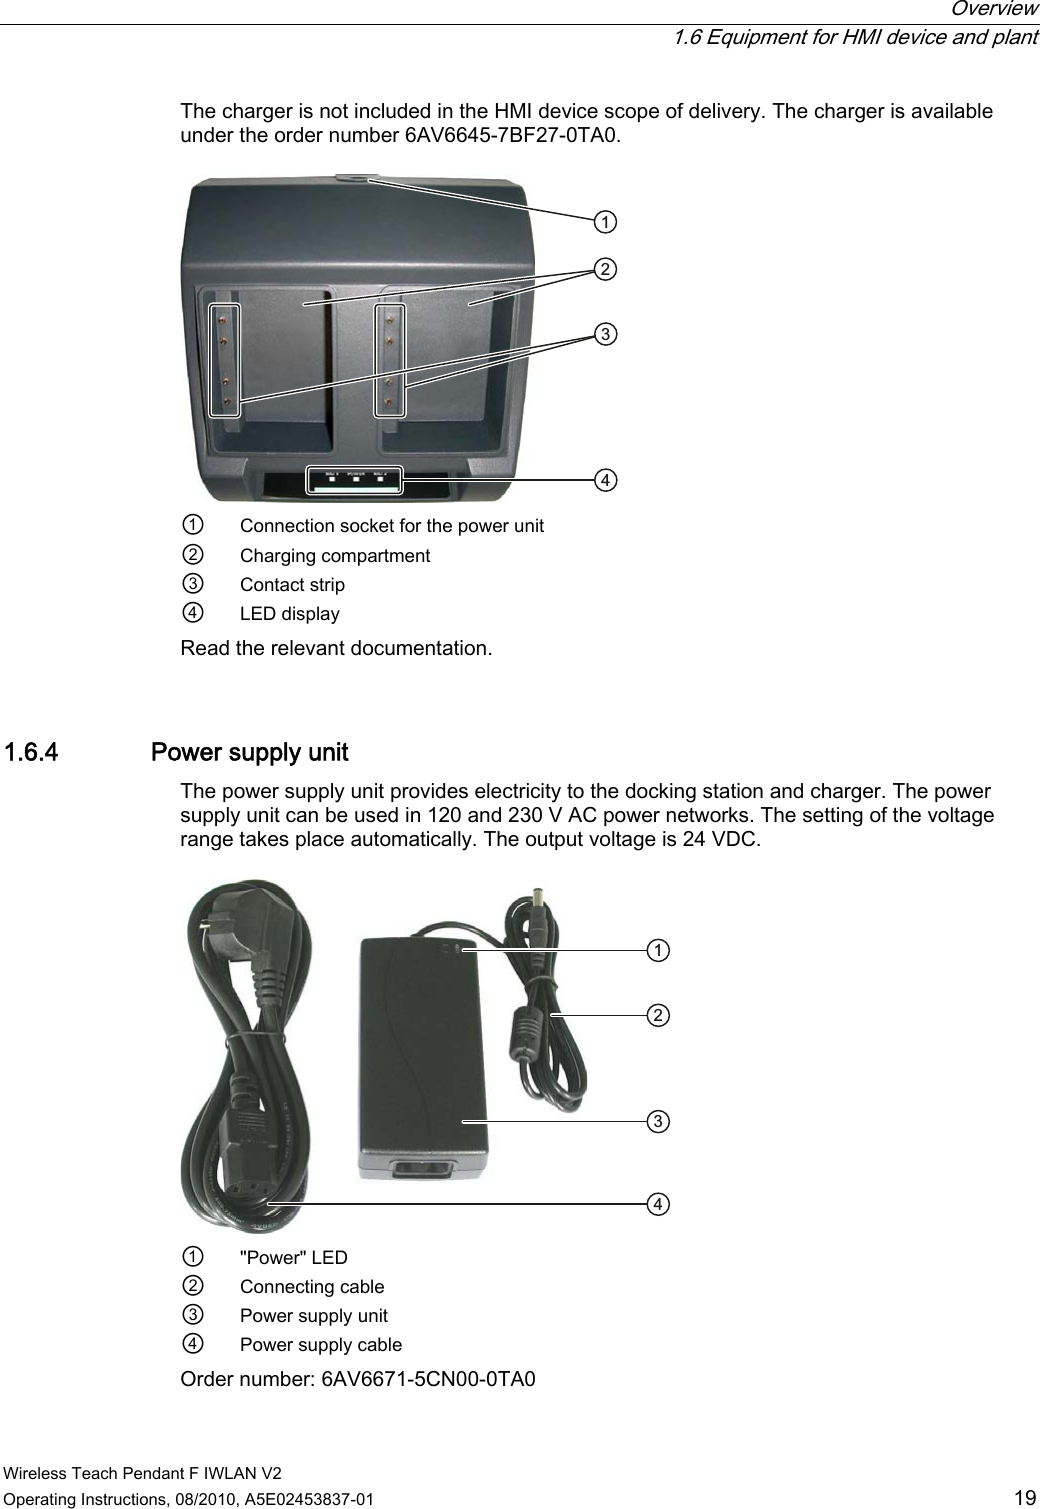  Overview   1.6 Equipment for HMI device and plant Wireless Teach Pendant F IWLAN V2 Operating Instructions, 08/2010, A5E02453837-01  19 The charger is not included in the HMI device scope of delivery. The charger is available under the order number 6AV6645-7BF27-0TA0.  ①  Connection socket for the power unit ②  Charging compartment ③  Contact strip ④  LED display Read the relevant documentation. 1.6.4 Power supply unit The power supply unit provides electricity to the docking station and charger. The power supply unit can be used in 120 and 230 V AC power networks. The setting of the voltage range takes place automatically. The output voltage is 24 VDC.  ①  &quot;Power&quot; LED ②  Connecting cable ③  Power supply unit ④  Power supply cable Order number: 6AV6671-5CN00-0TA0 PRELIMINARY II 1.7.2010